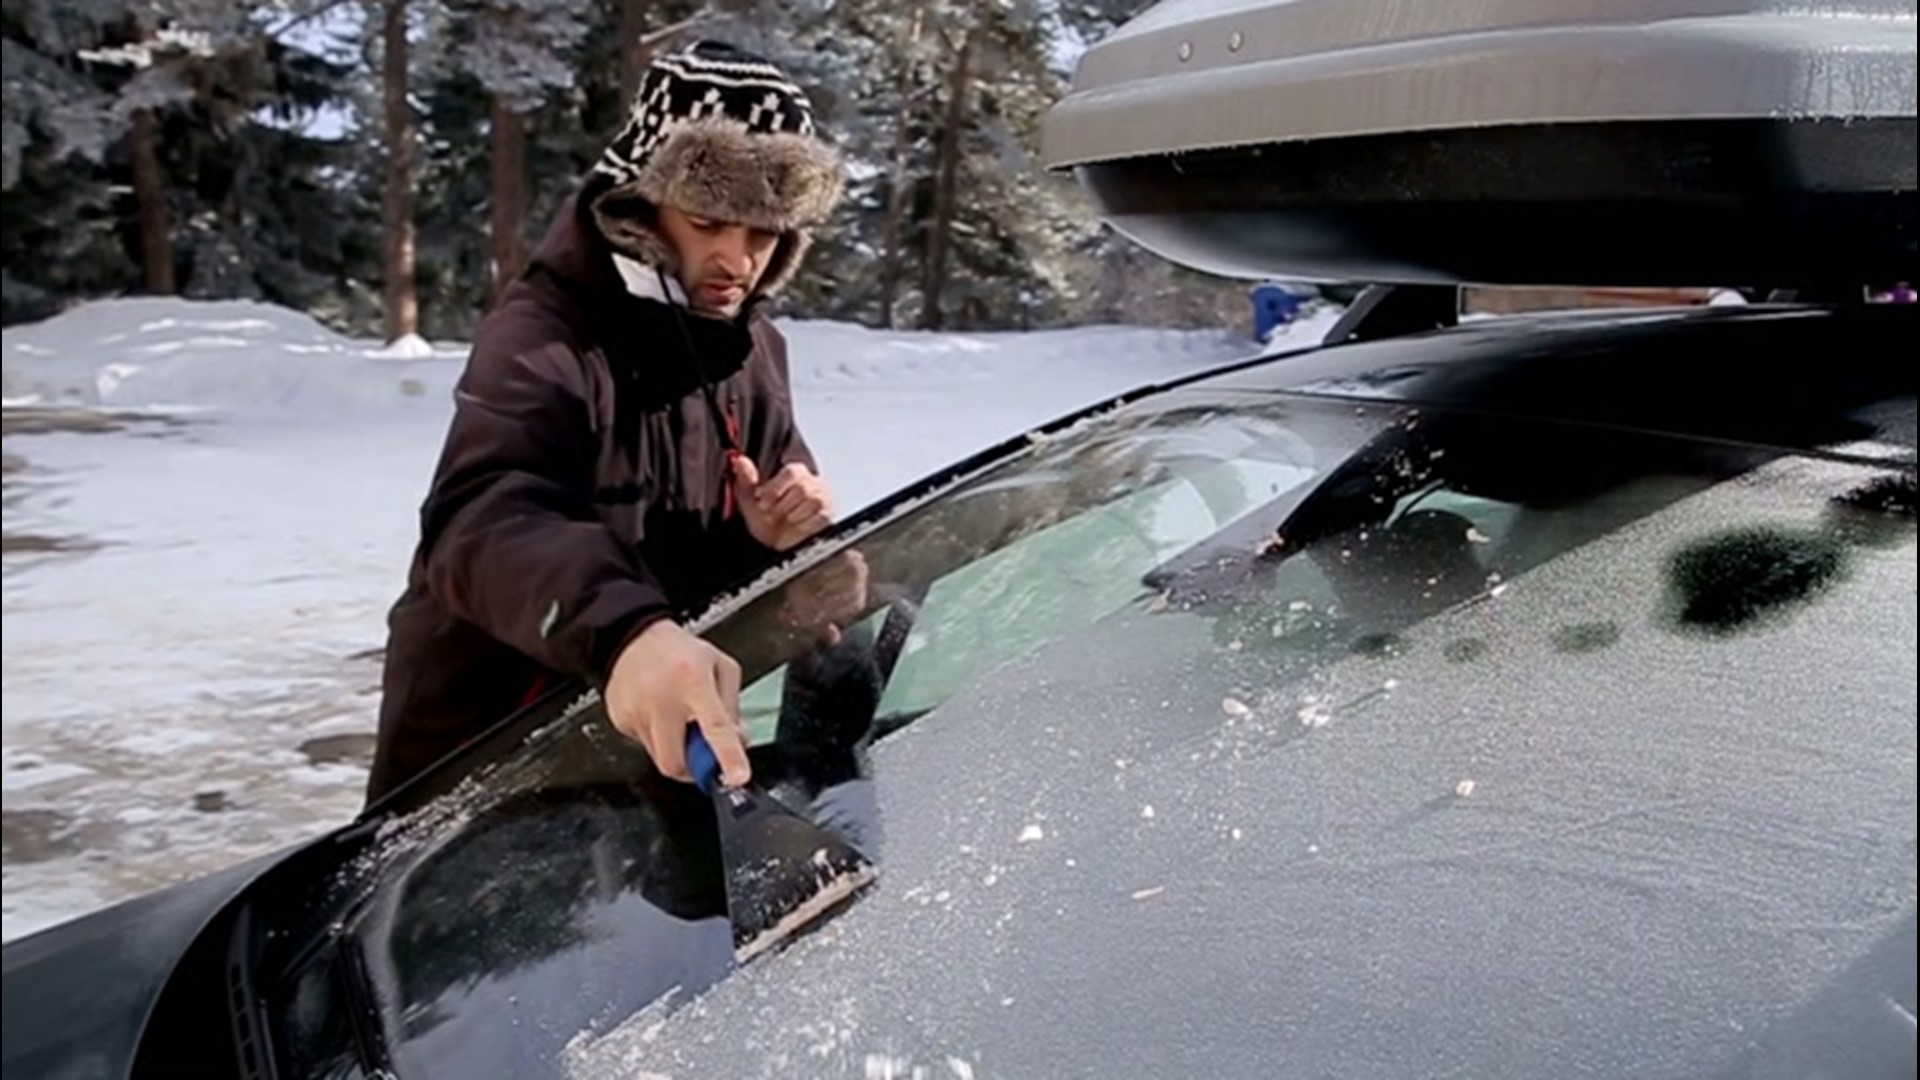 Before leaving for work in the morning, have you ever wondered why cars frost over during cold weather?